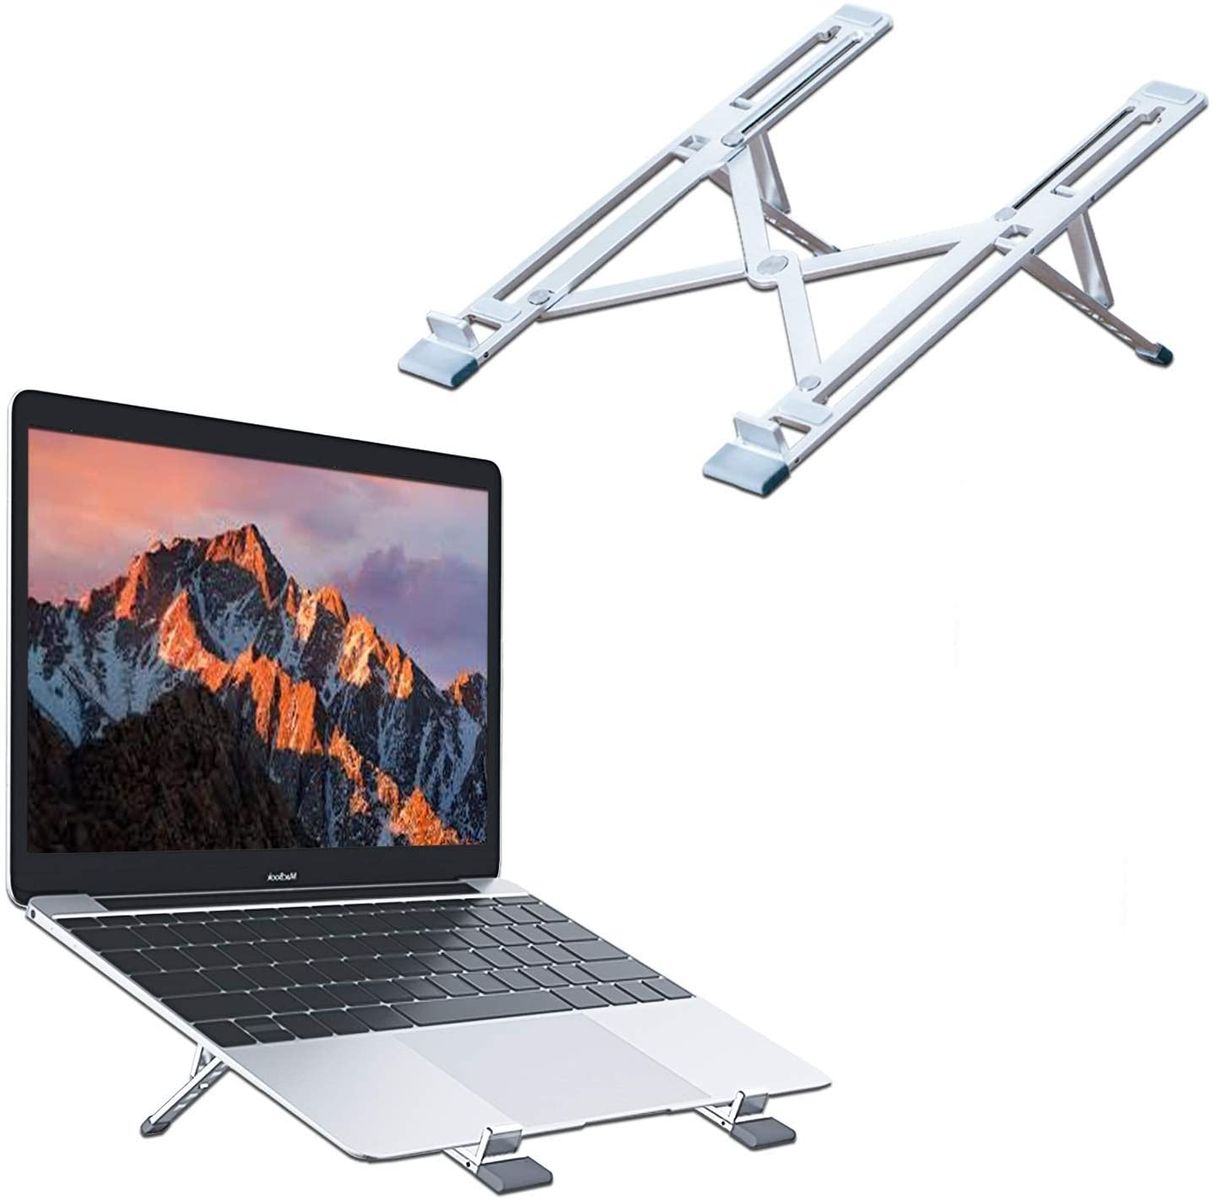 Klim Steady - Laptop Stand and Tablet Stand + Lightweight, Robust Aluminium Frame + Adjustable Notebook Stand Compatible with iPad and Laptop up to 15.6 Inches